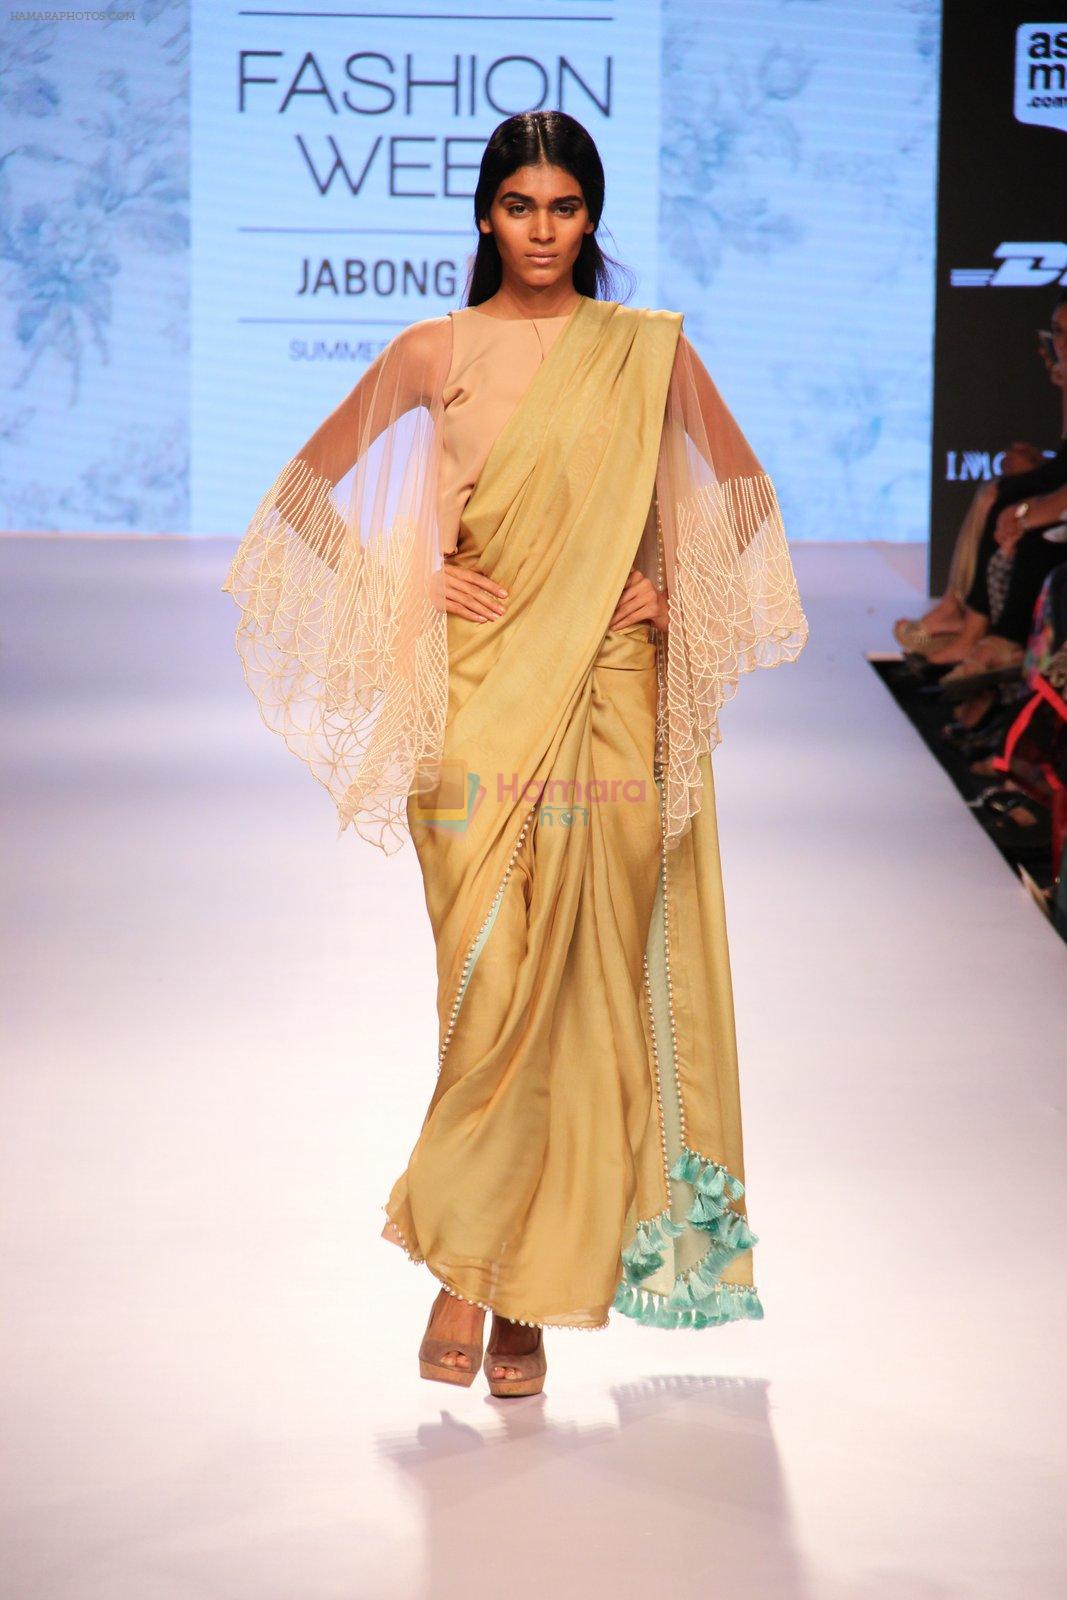 Model walks the ramp for Frou Frou at Lakme Fashion Week 2015 Day 1 on 18th March 2015